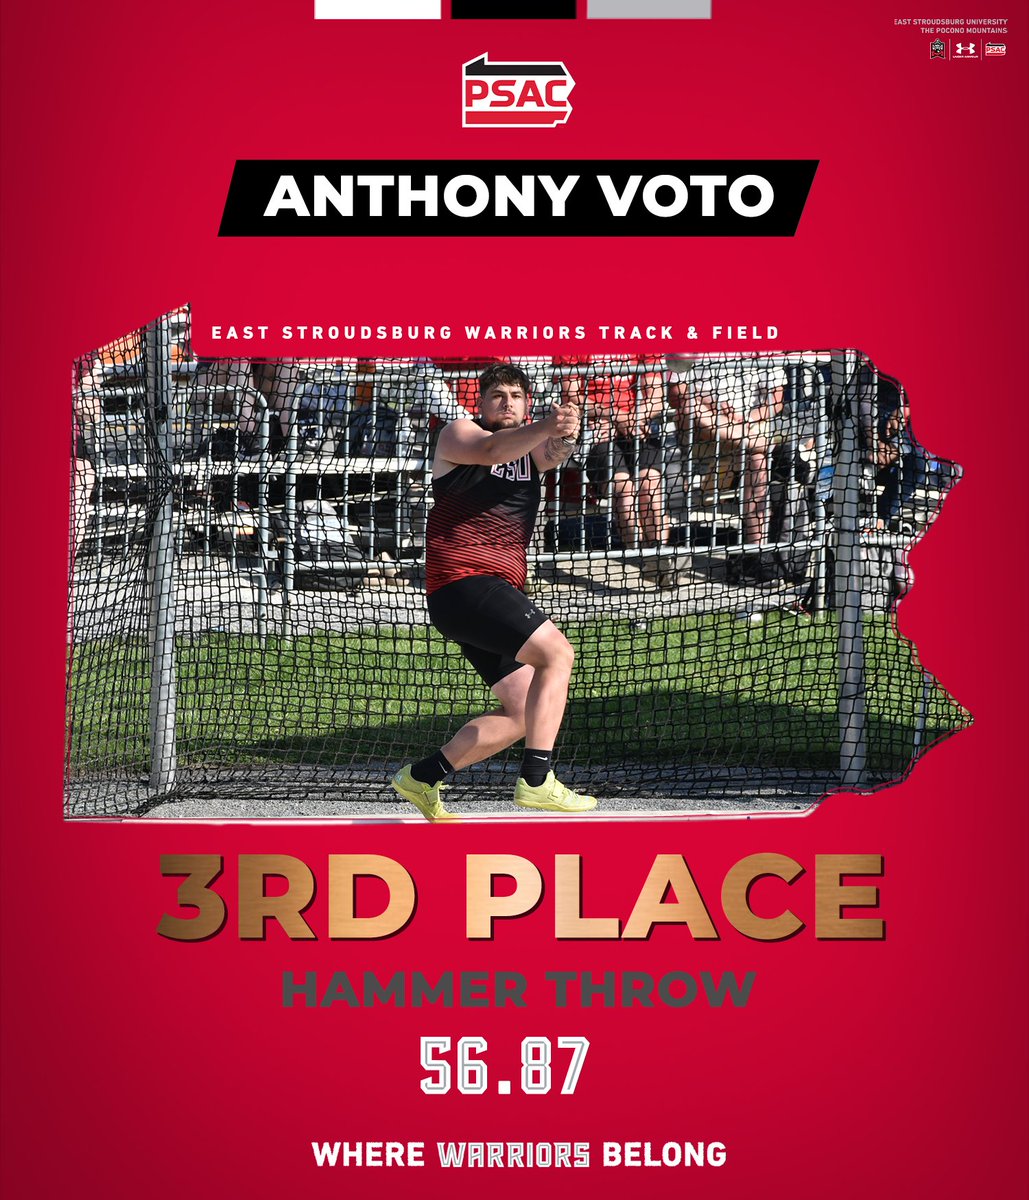 🥈&🥉 Isaac Almoney recorded a runner-up finish in hammer throw with a personal-best and NCAA provisional mark of 58.18m (190-10) Anthony Voto was right behind in 3rd place after recording a throw of 56.87m (186-7) #WhereWarriorsBelong